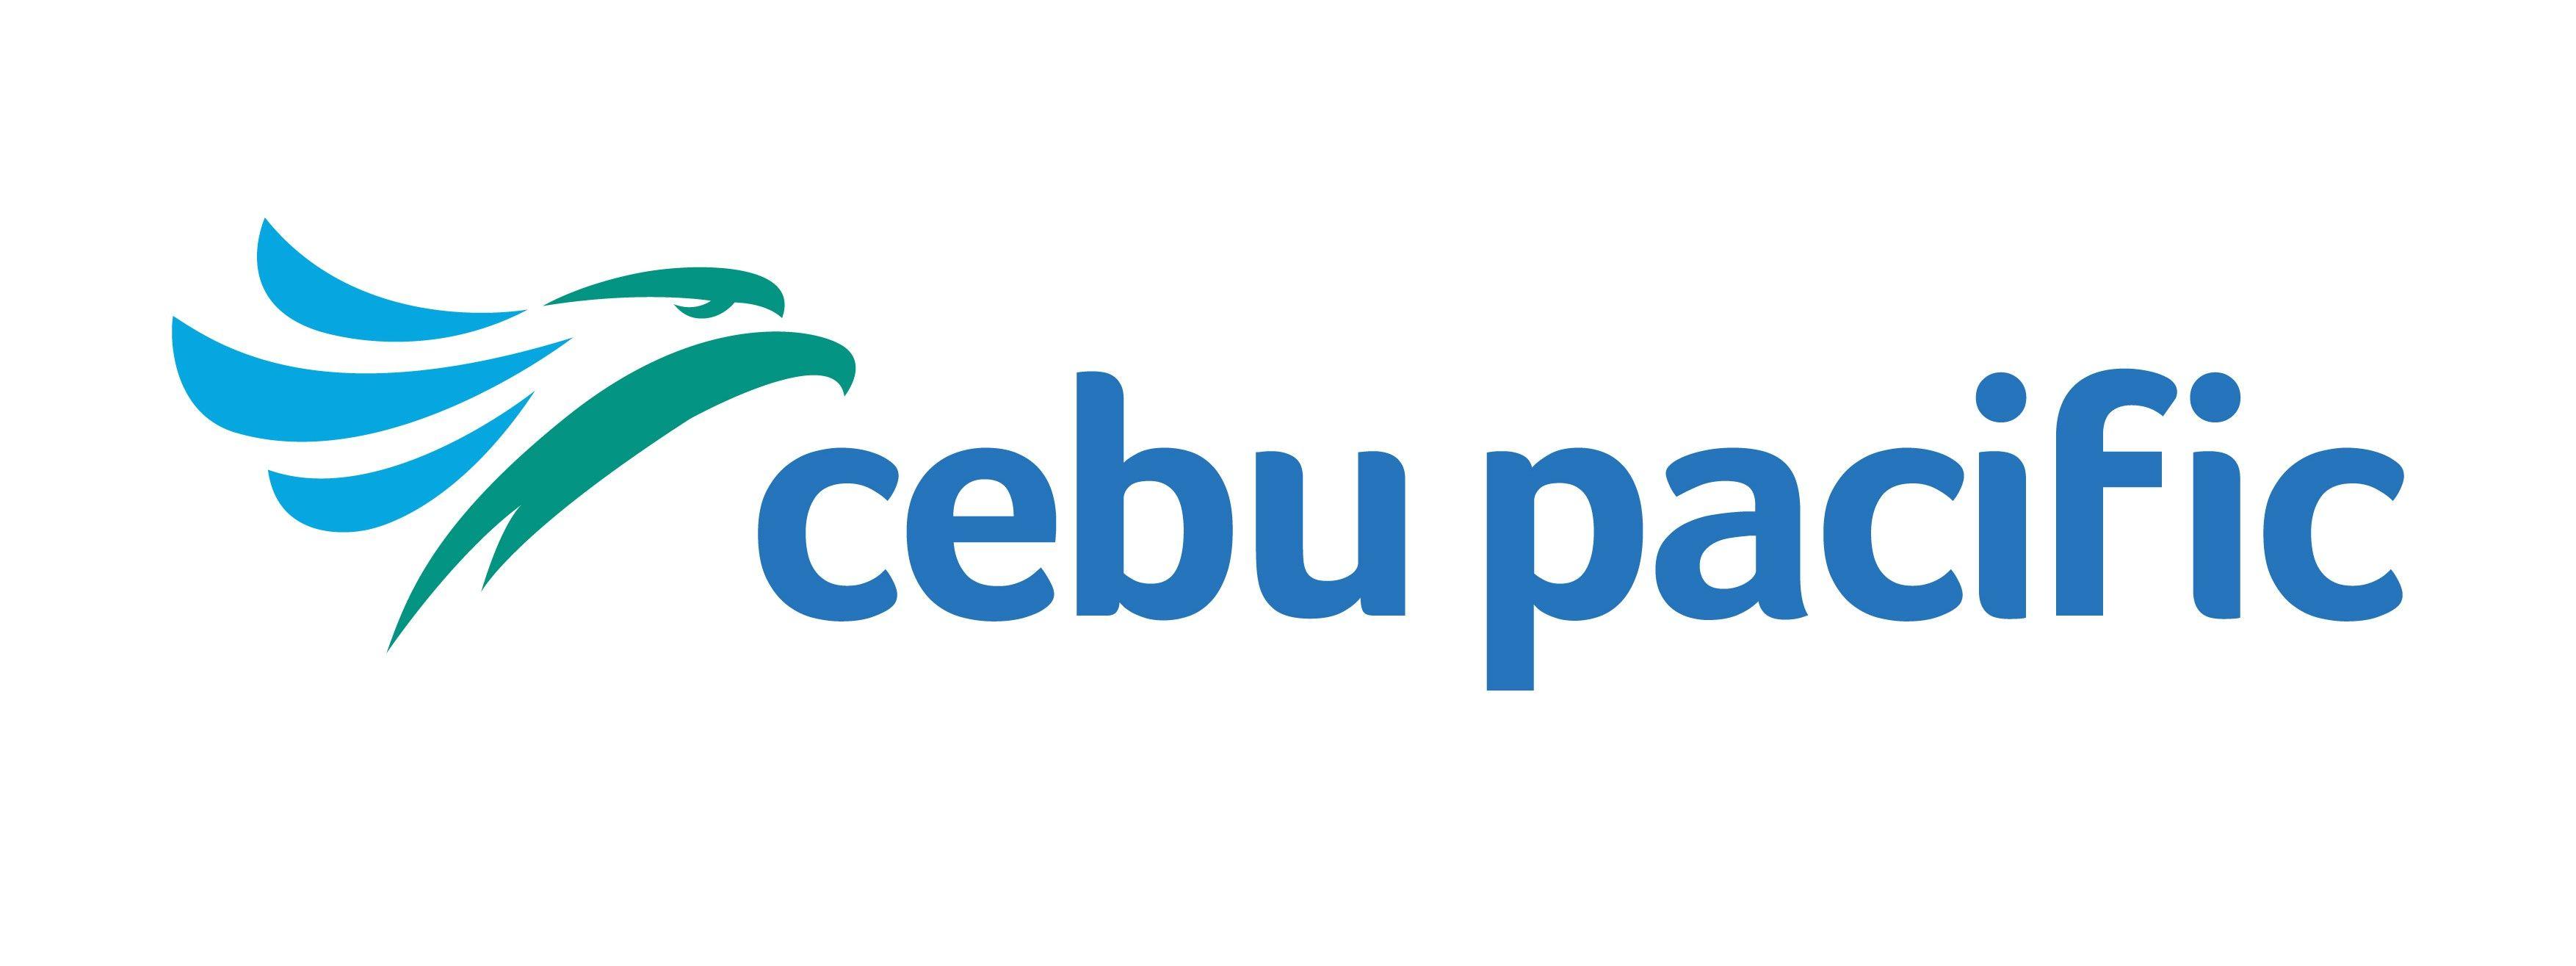 Pacific Logo - Cebu Pacific Introduce New Brand Image | TheDesignAir